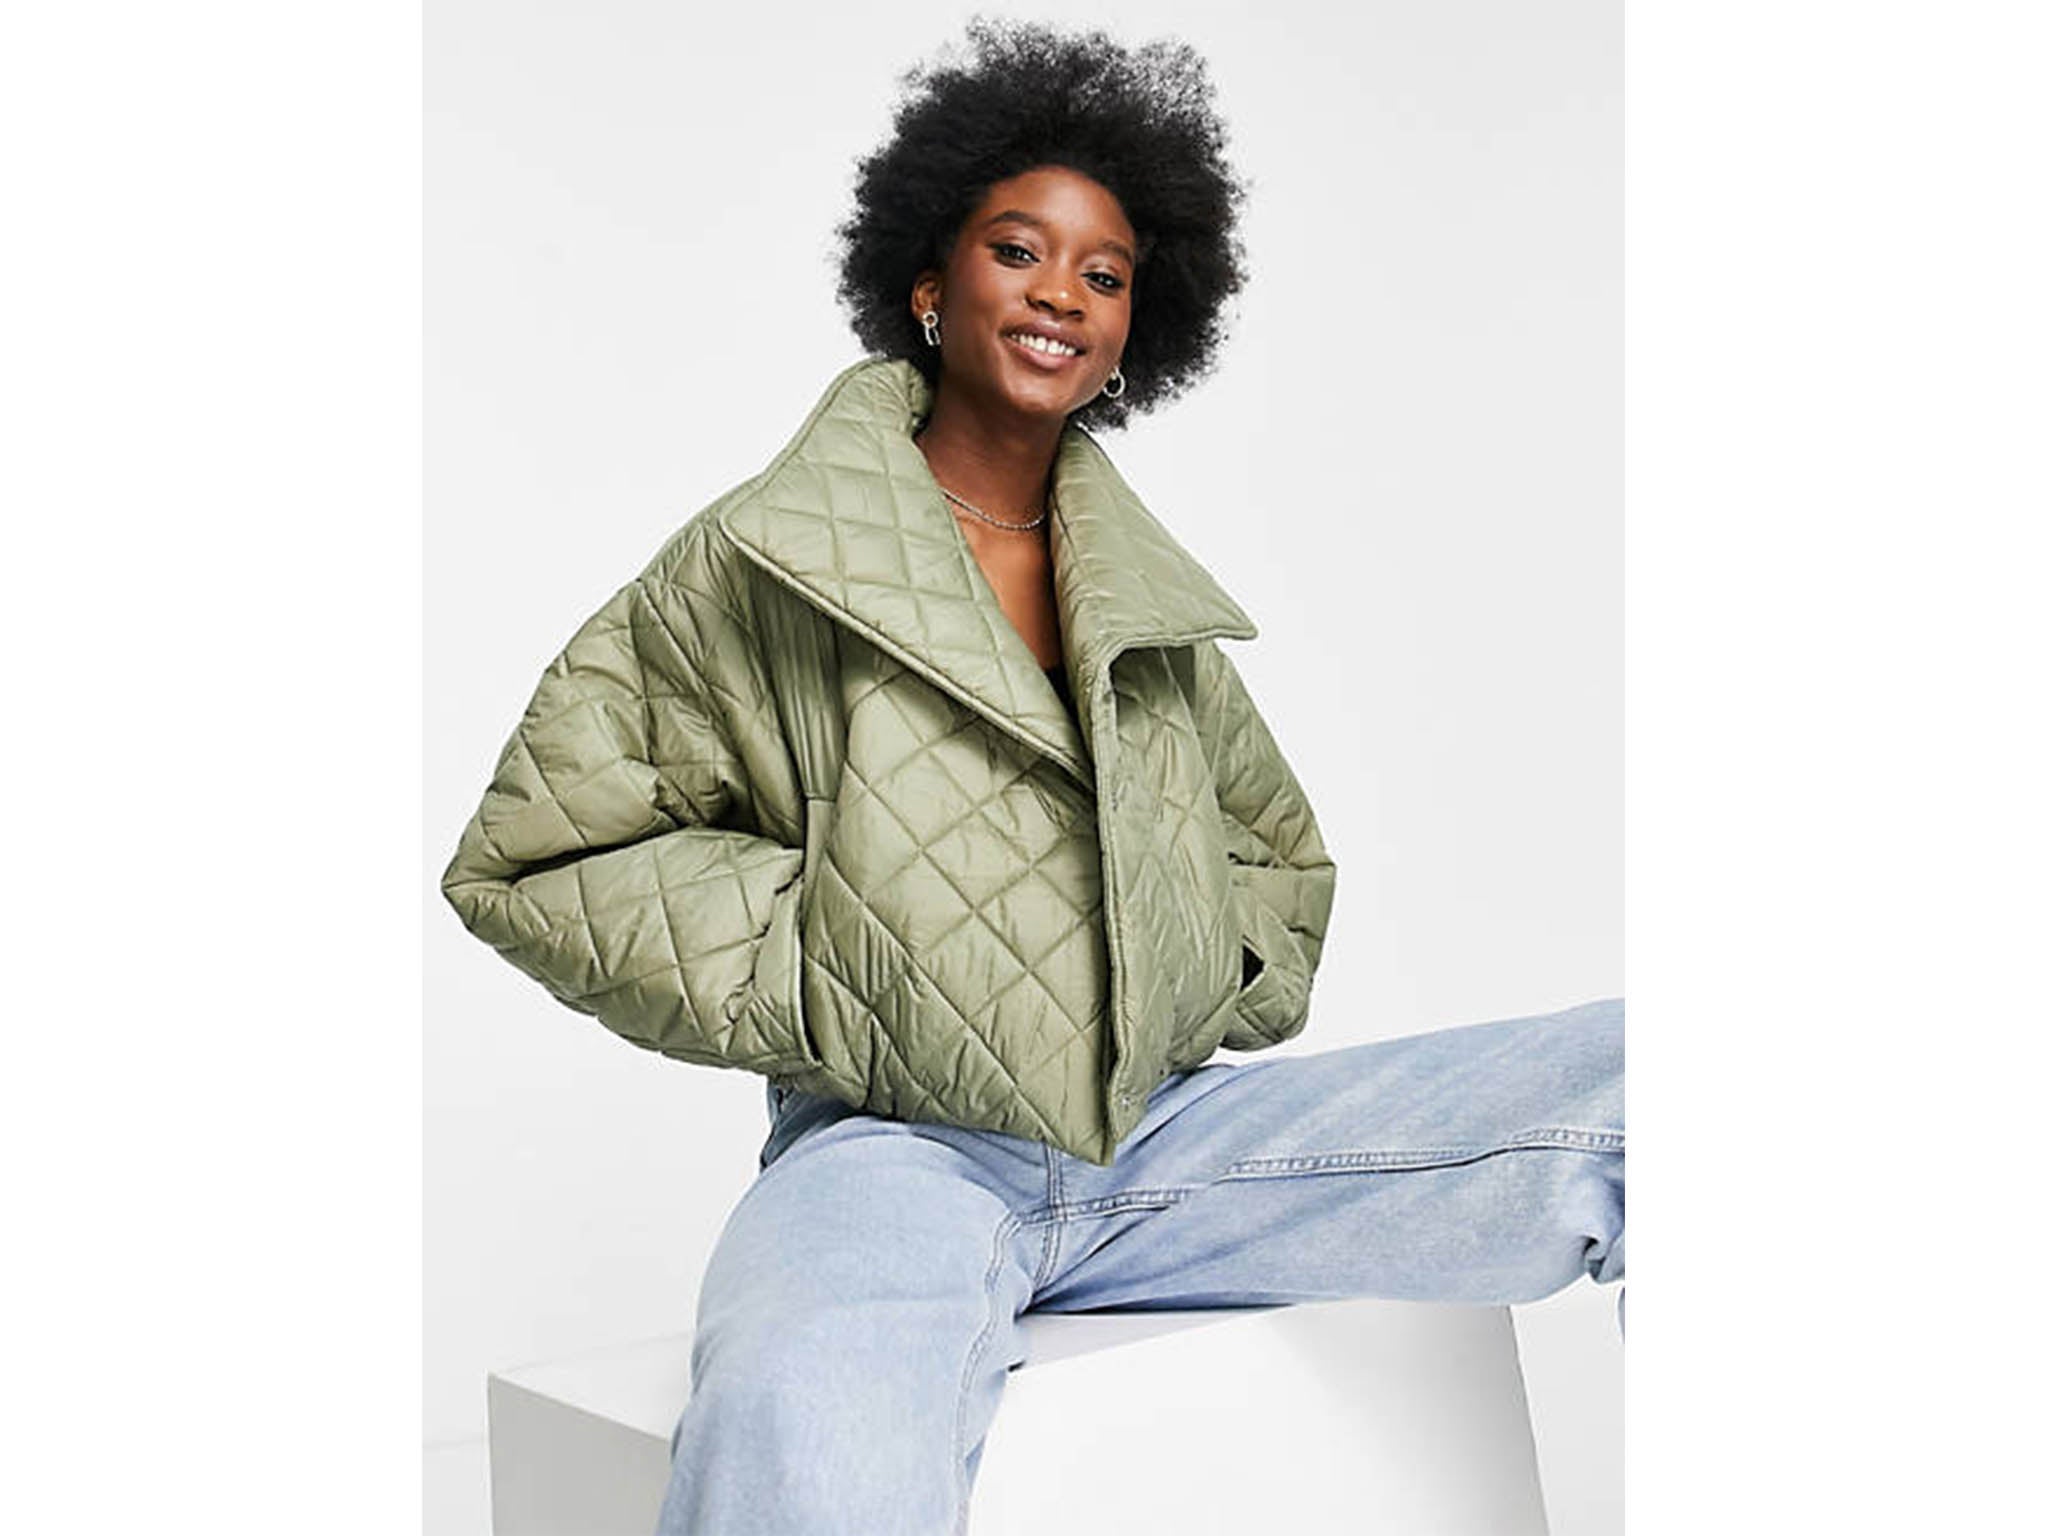 The Frankie Shop's quilted jacket is back in stock: High street